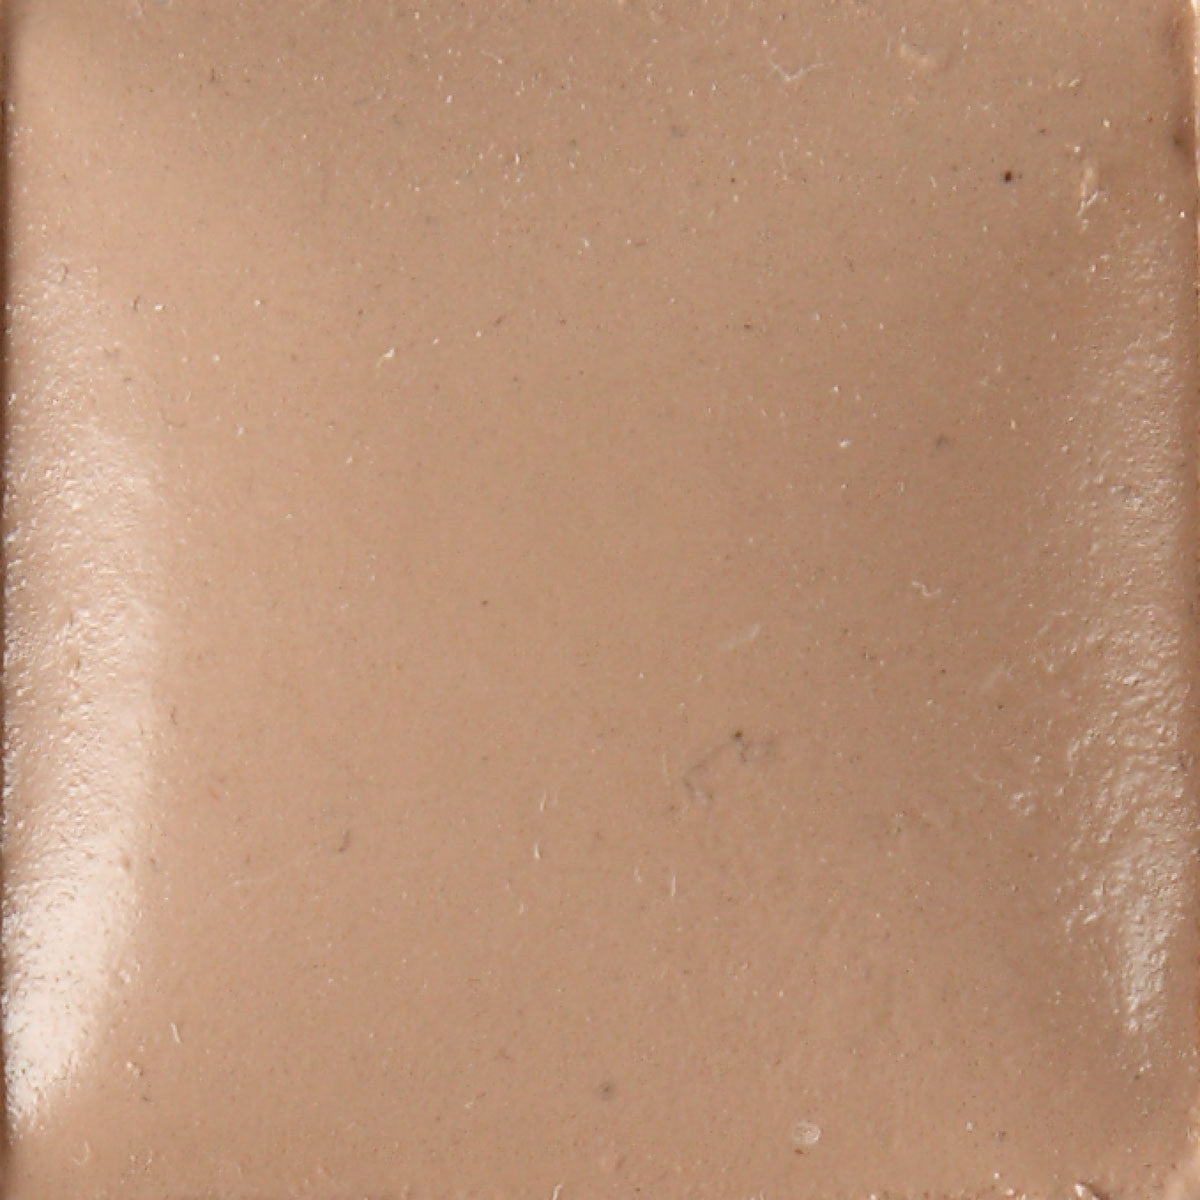 Duncan OS467 Light Brown Opaque Bisq-Stain, 2 oz